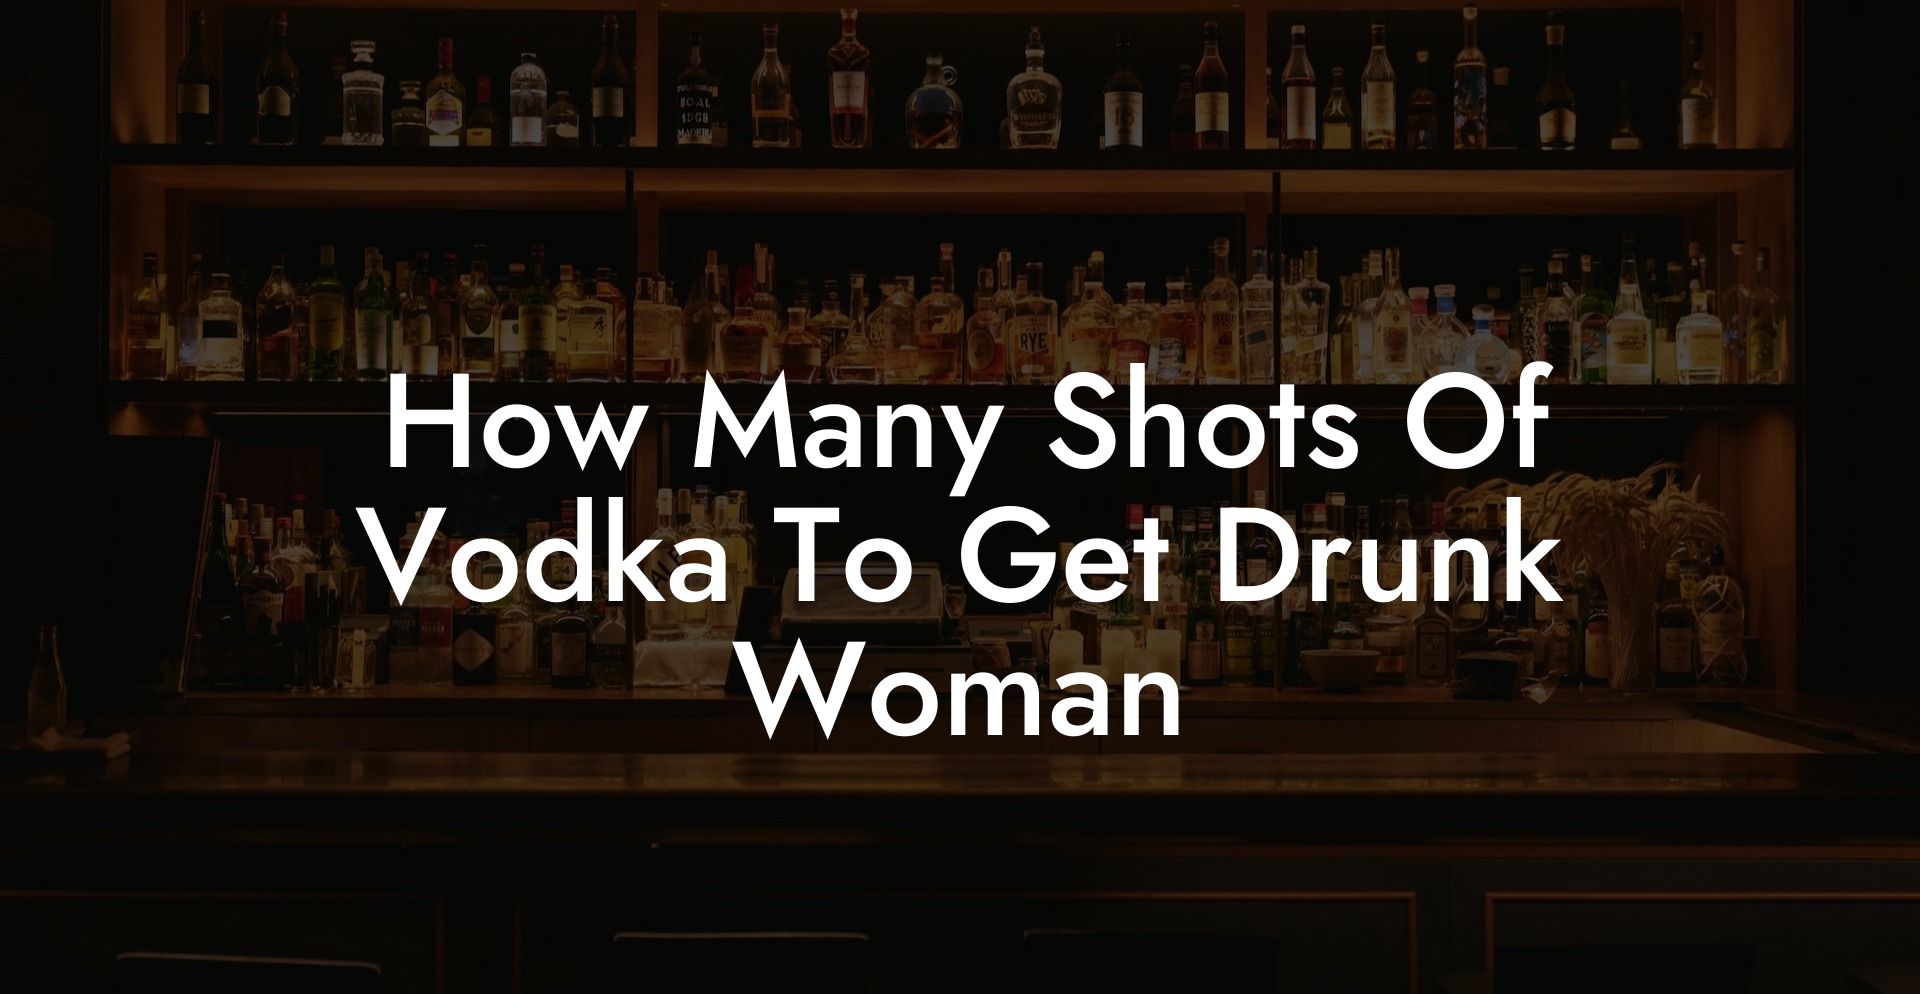 How Many Shots Of Vodka To Get Drunk Woman